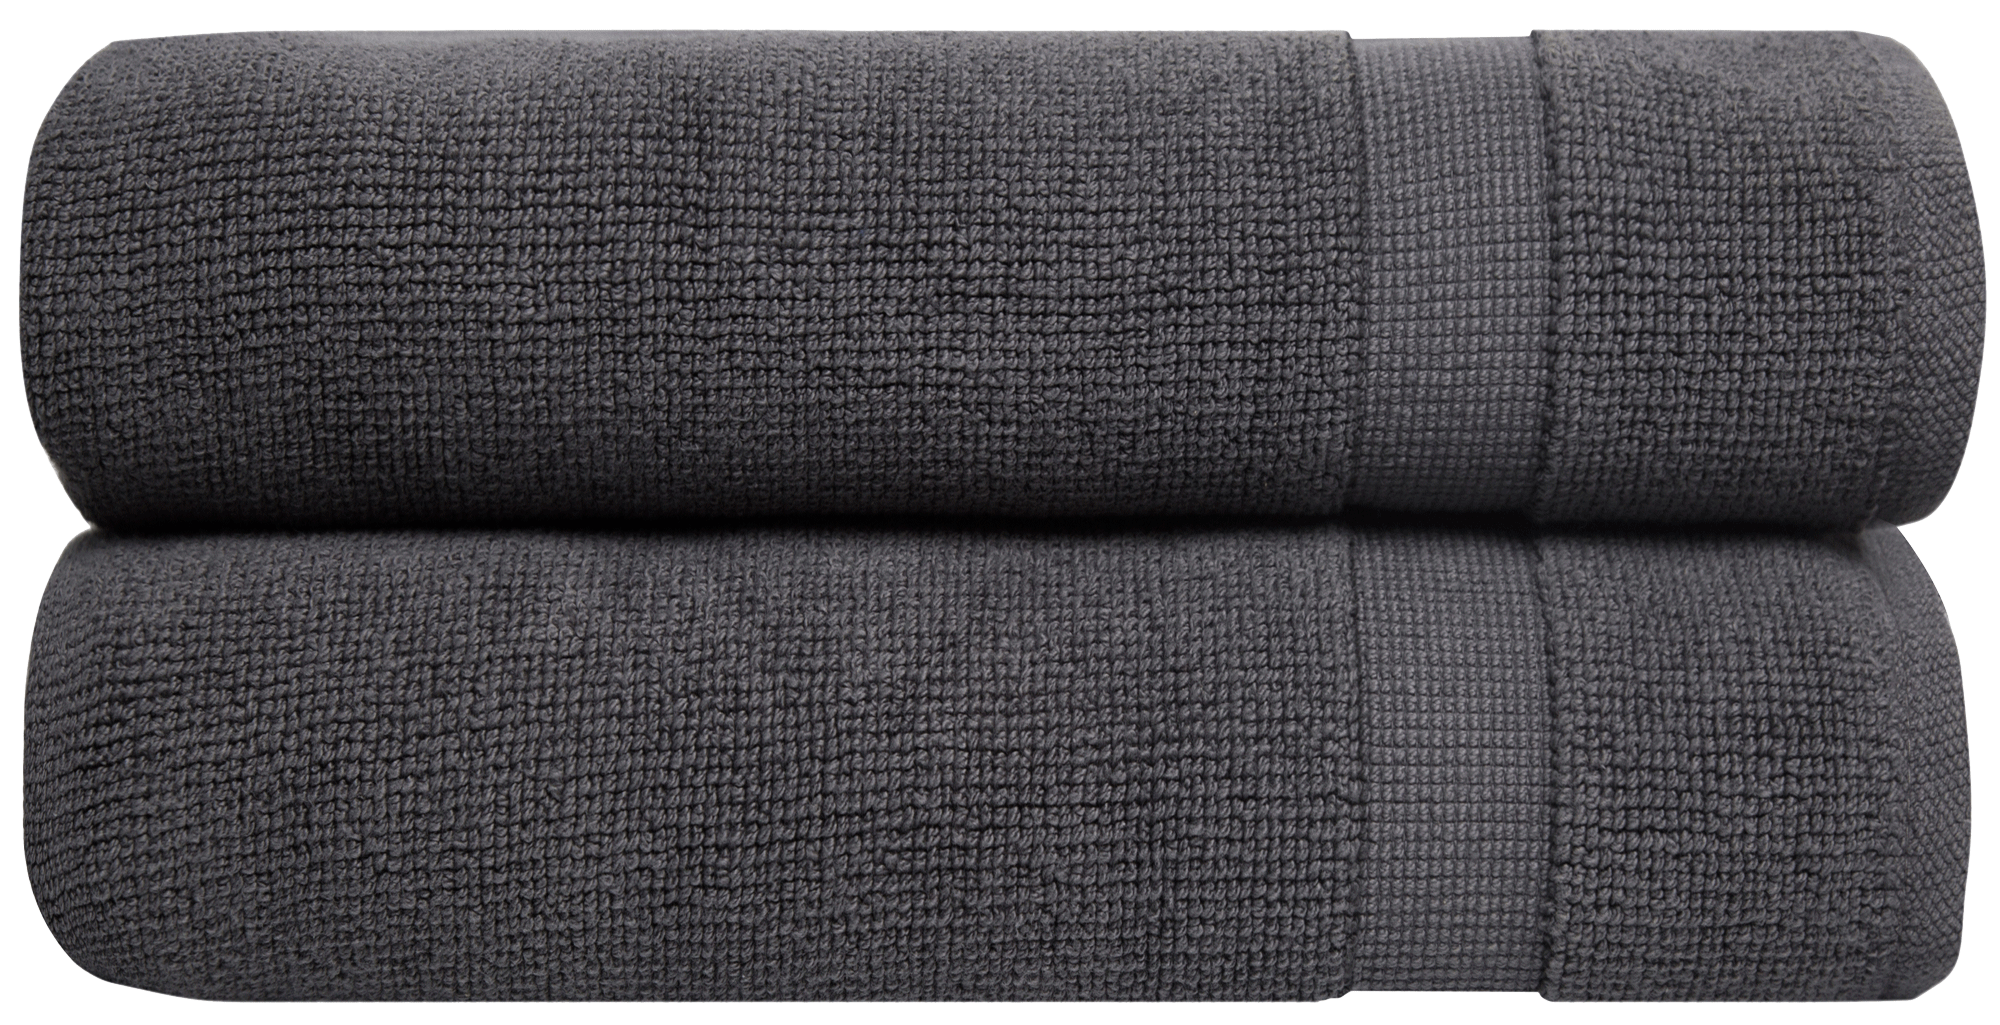 Bliss Luxury Combed Cotton Bath Towel - 34 x 56 Extra Large Premium Quality Bath Sheet - 650 GSM - Soft, Absorbent (Denim, 4 Pack)